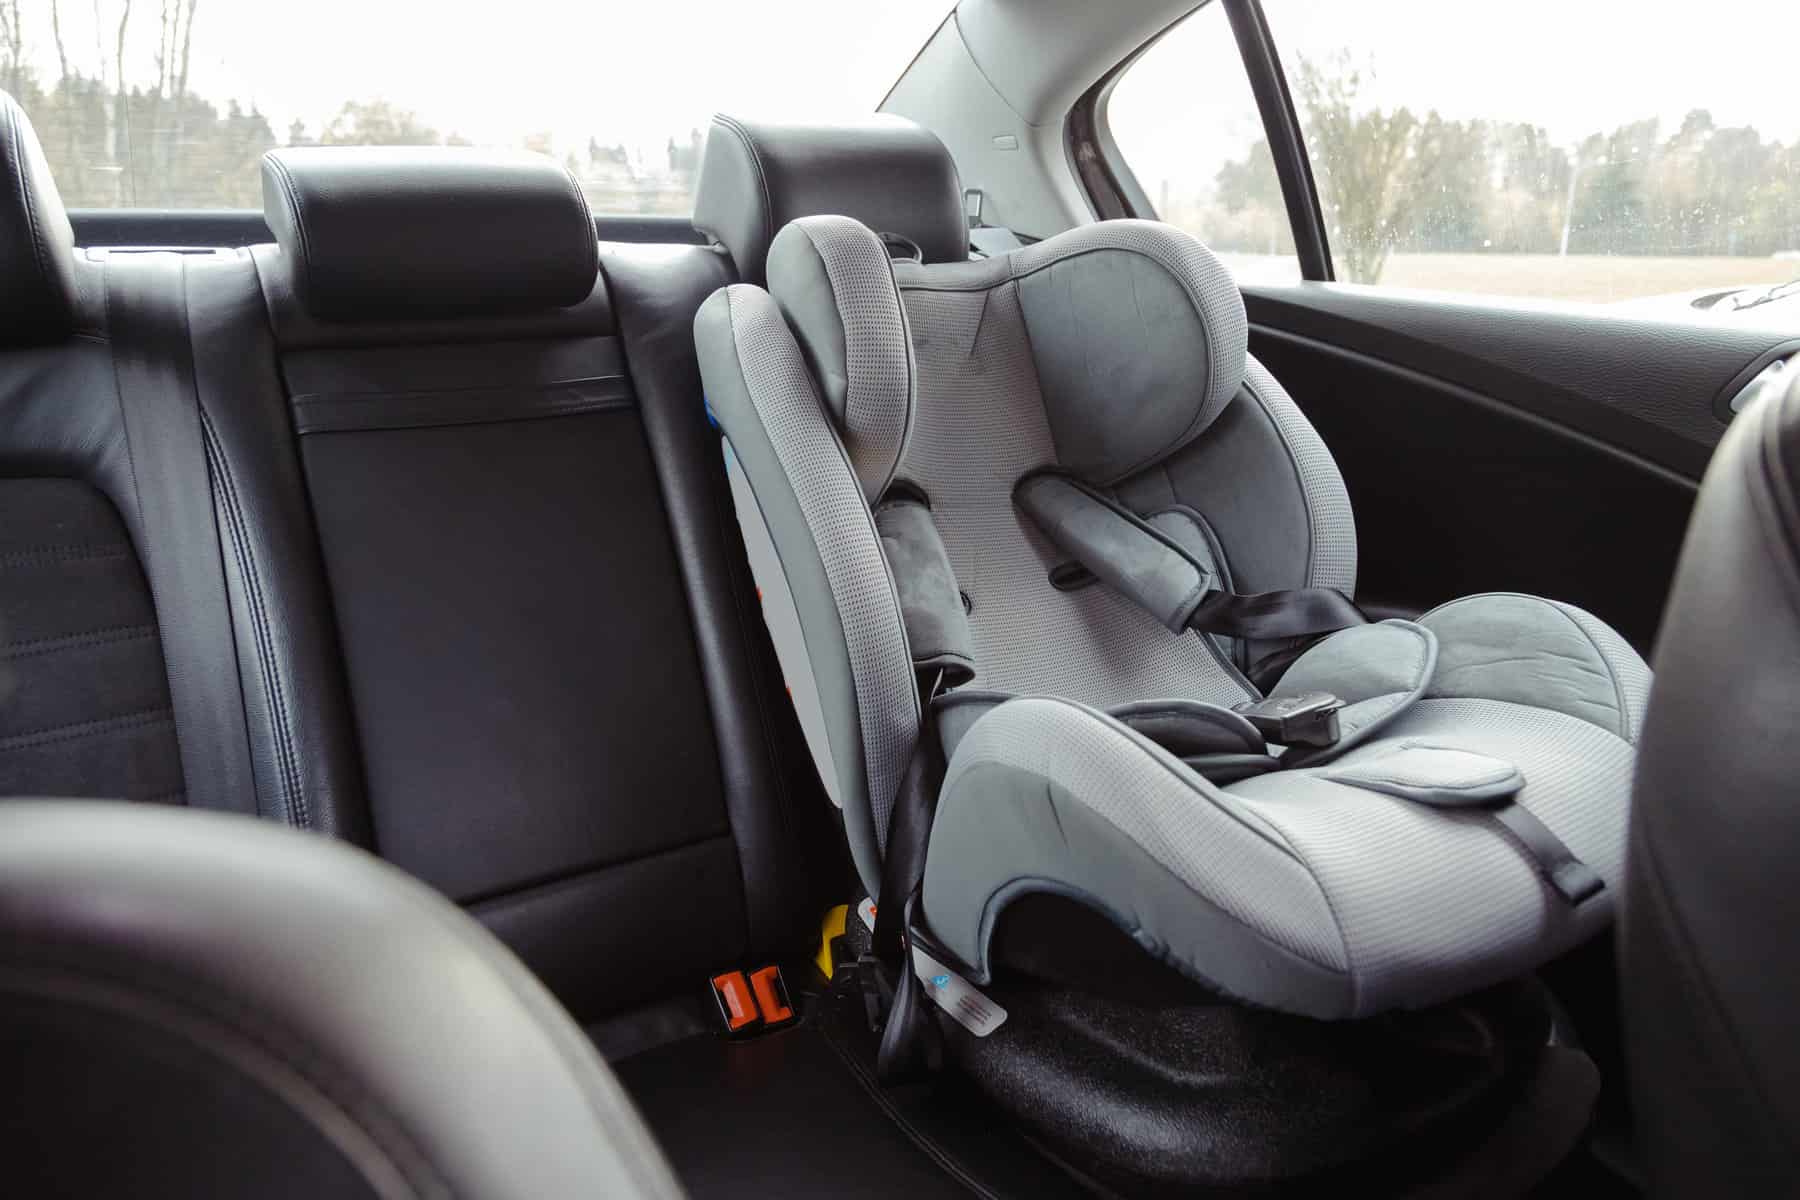 https://motherandbaby.com.sg/wp-content/uploads/2023/10/child-car-seat-for-safety-in-the-rear-passenger-seat-of-a-car.jpg